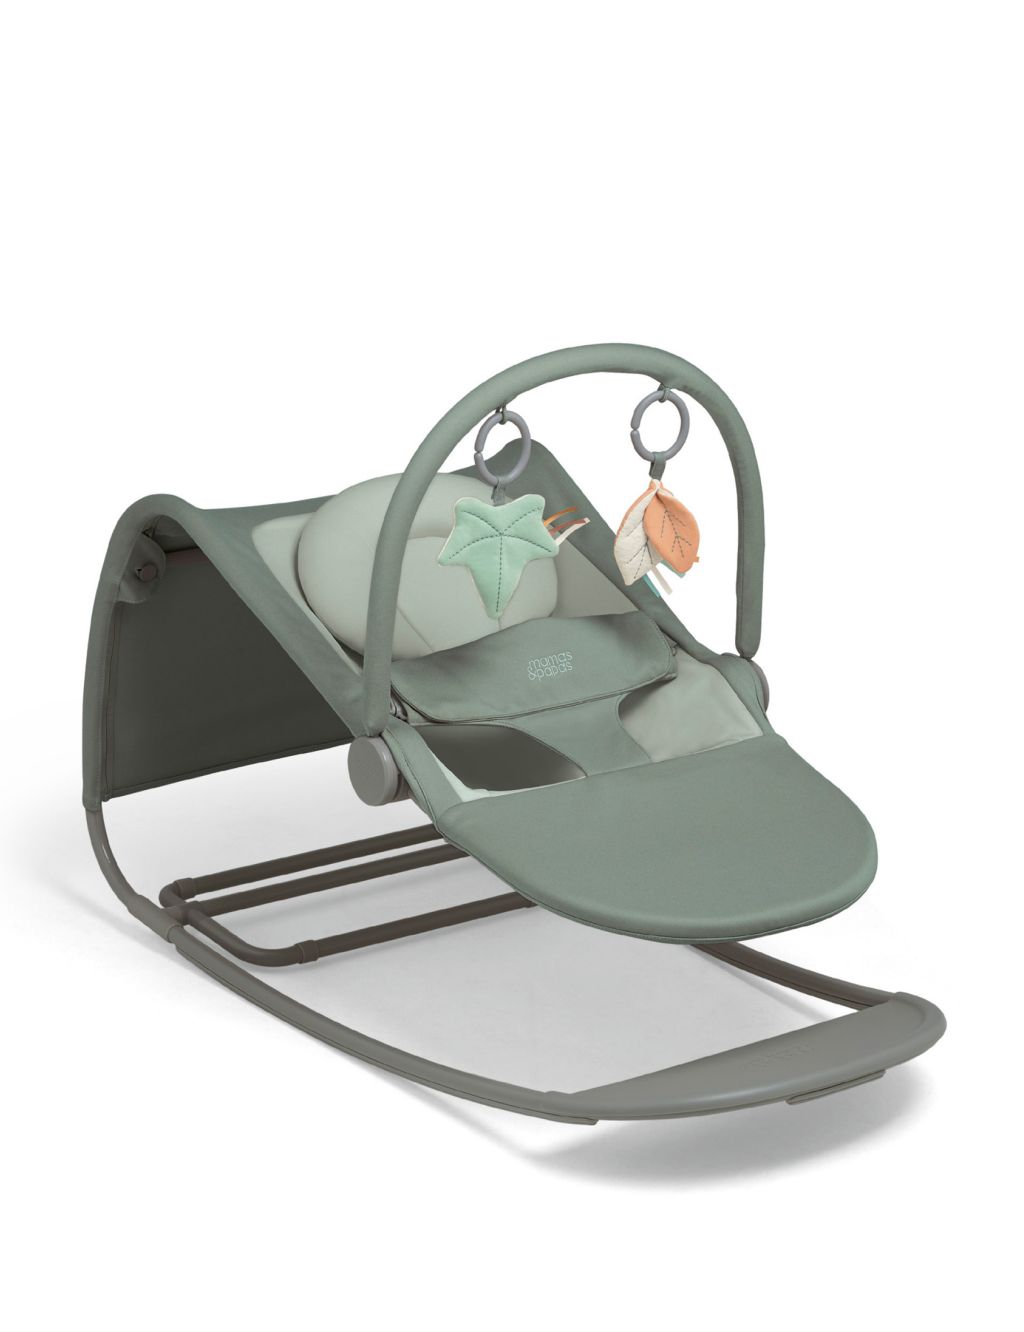 Tempo 3-in-1 Rocker Ivy Bouncer image 1